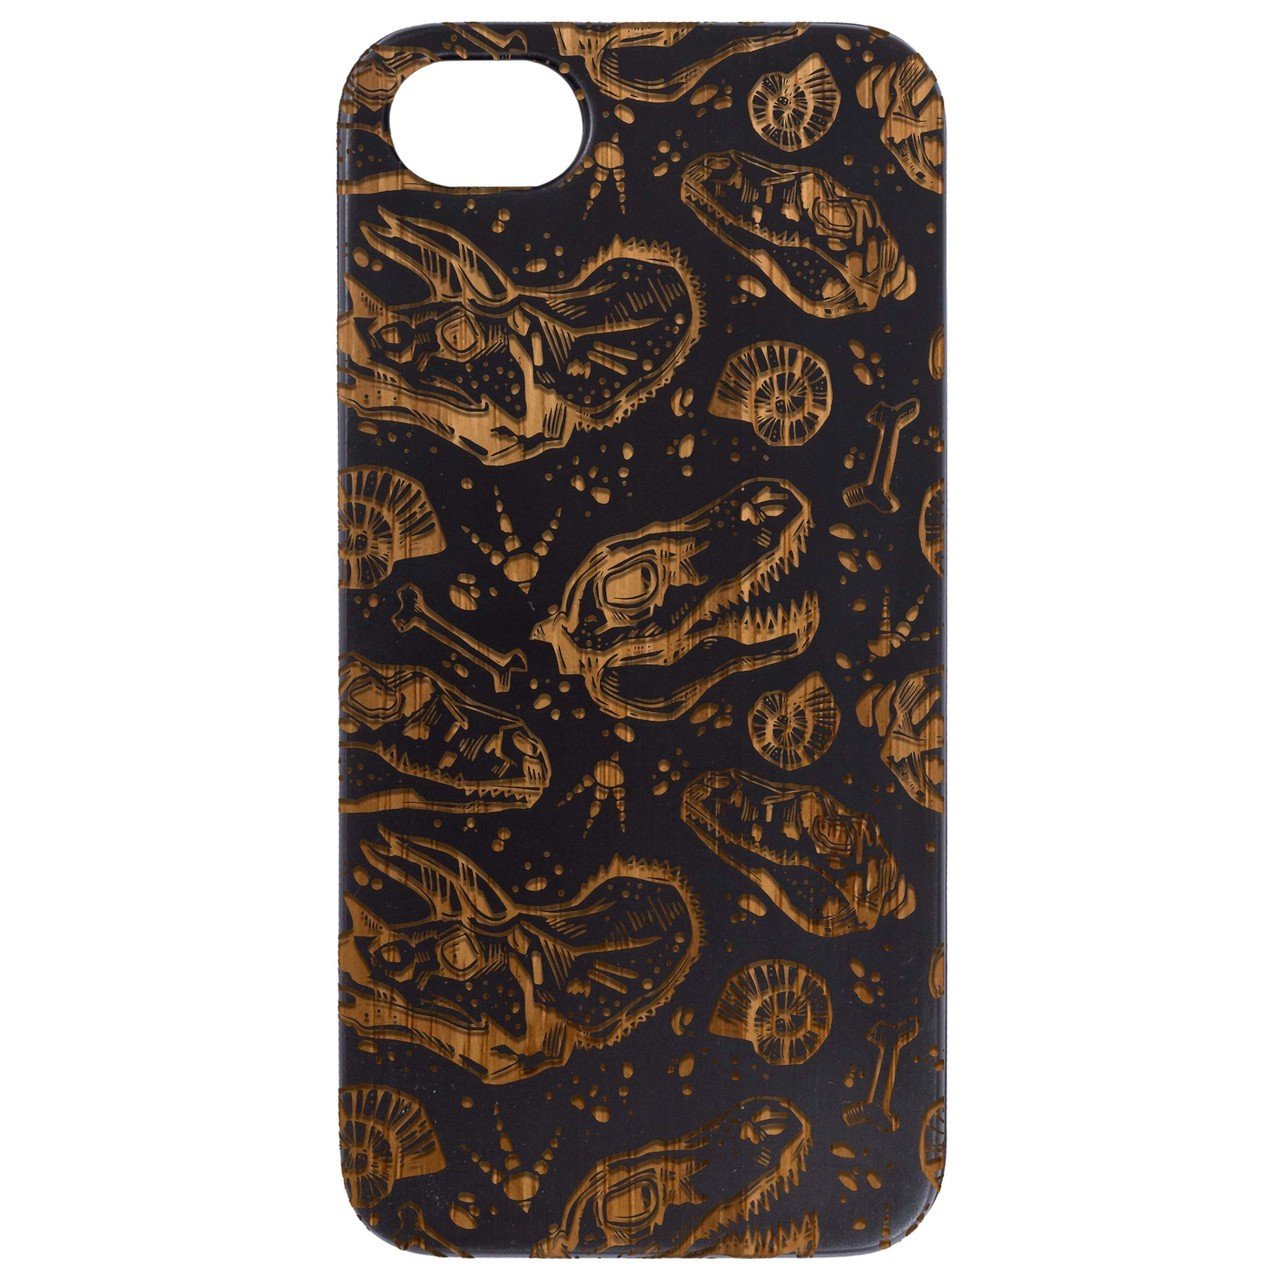 Dinosaur Fossil - Engraved - Wooden Phone Case